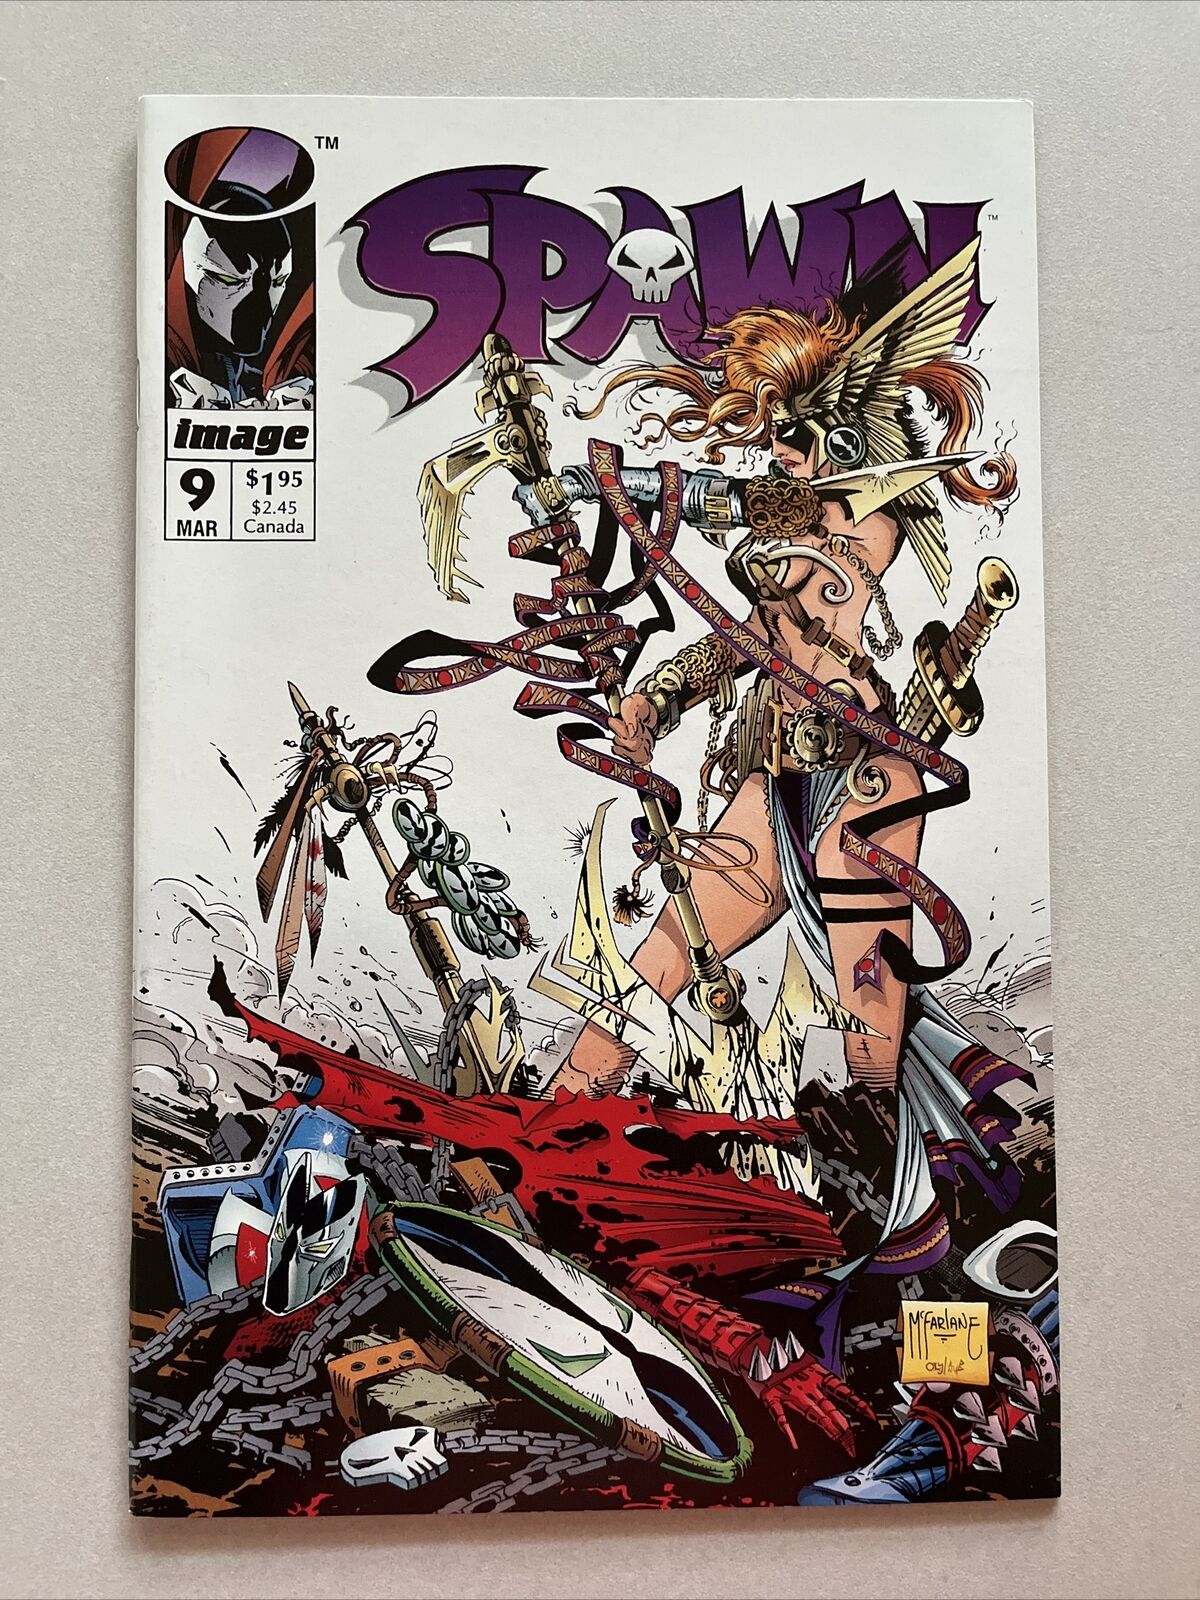 Spawn #9 (Image Comics March 1993) 1st appearance Angela Thor Marvel sister